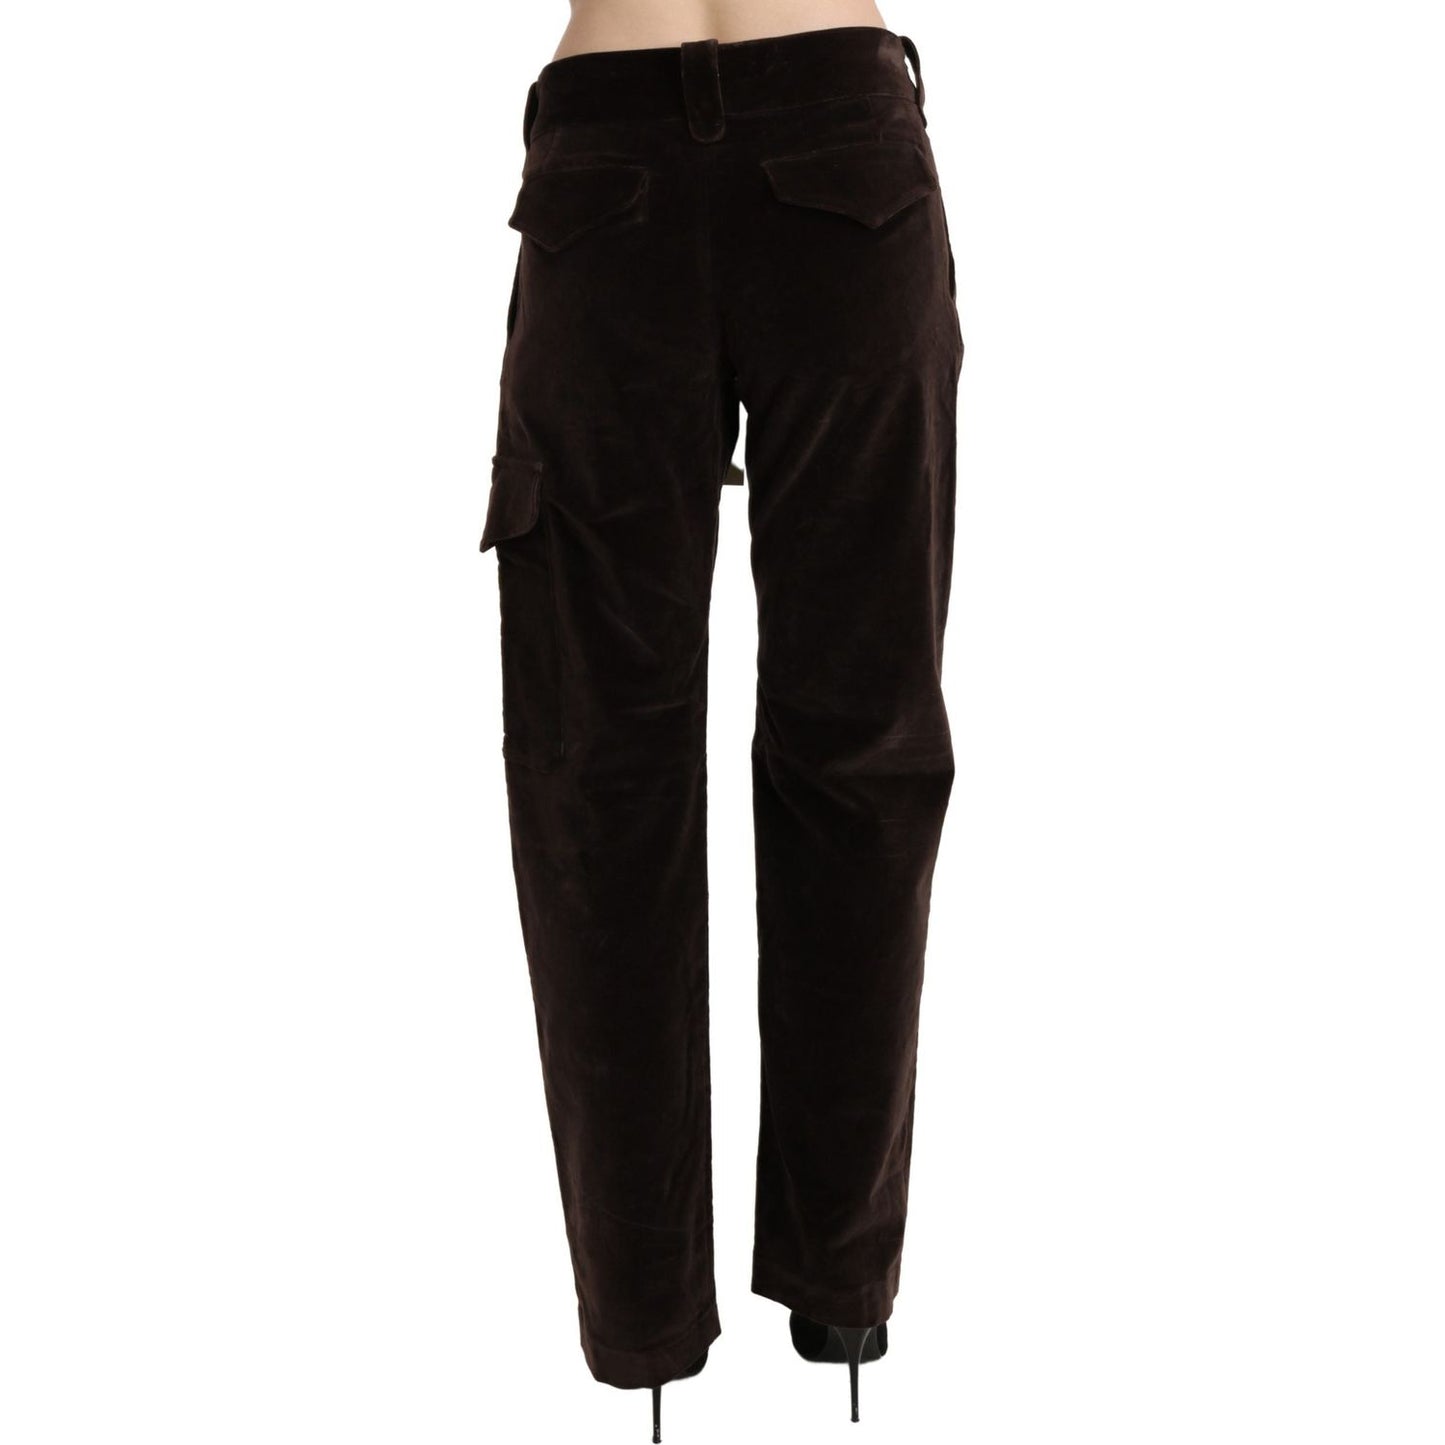 Ermanno Scervino Chic High Waist Cargo Pants in Sophisticated Brown brown-high-waist-cargo-straight-cotton-pants